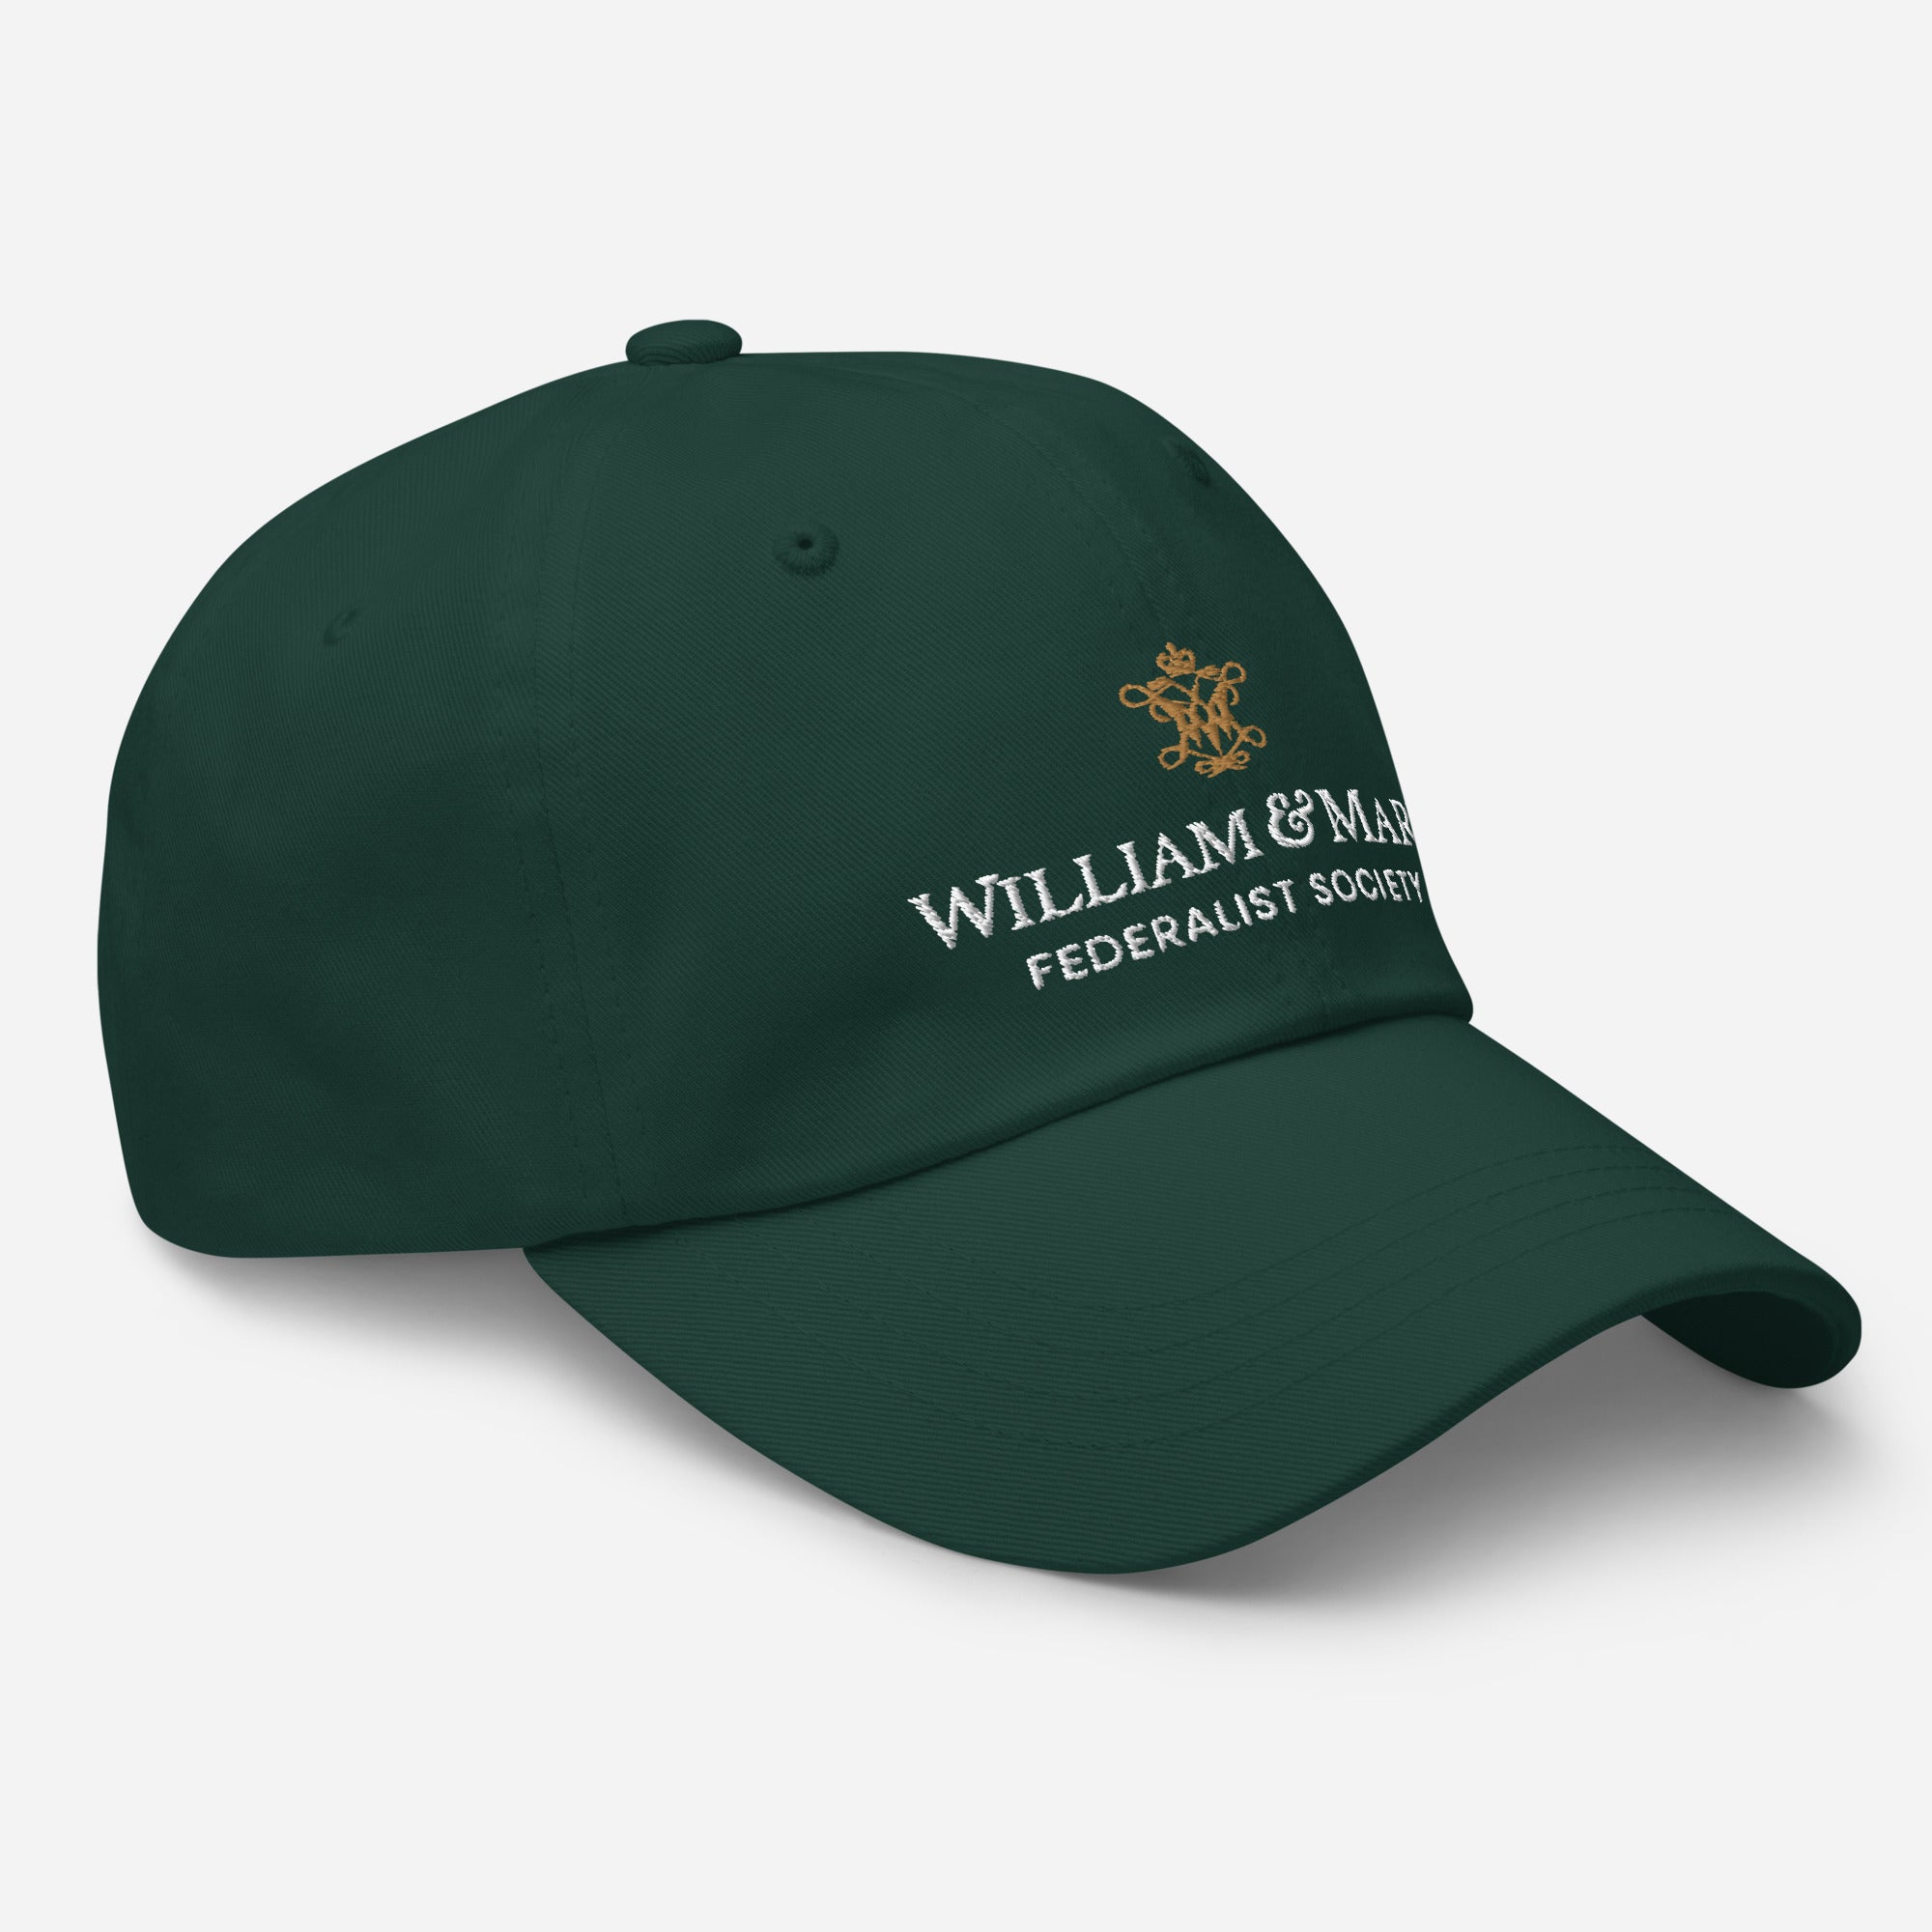 Green Hat (William and Mary Fed Soc)